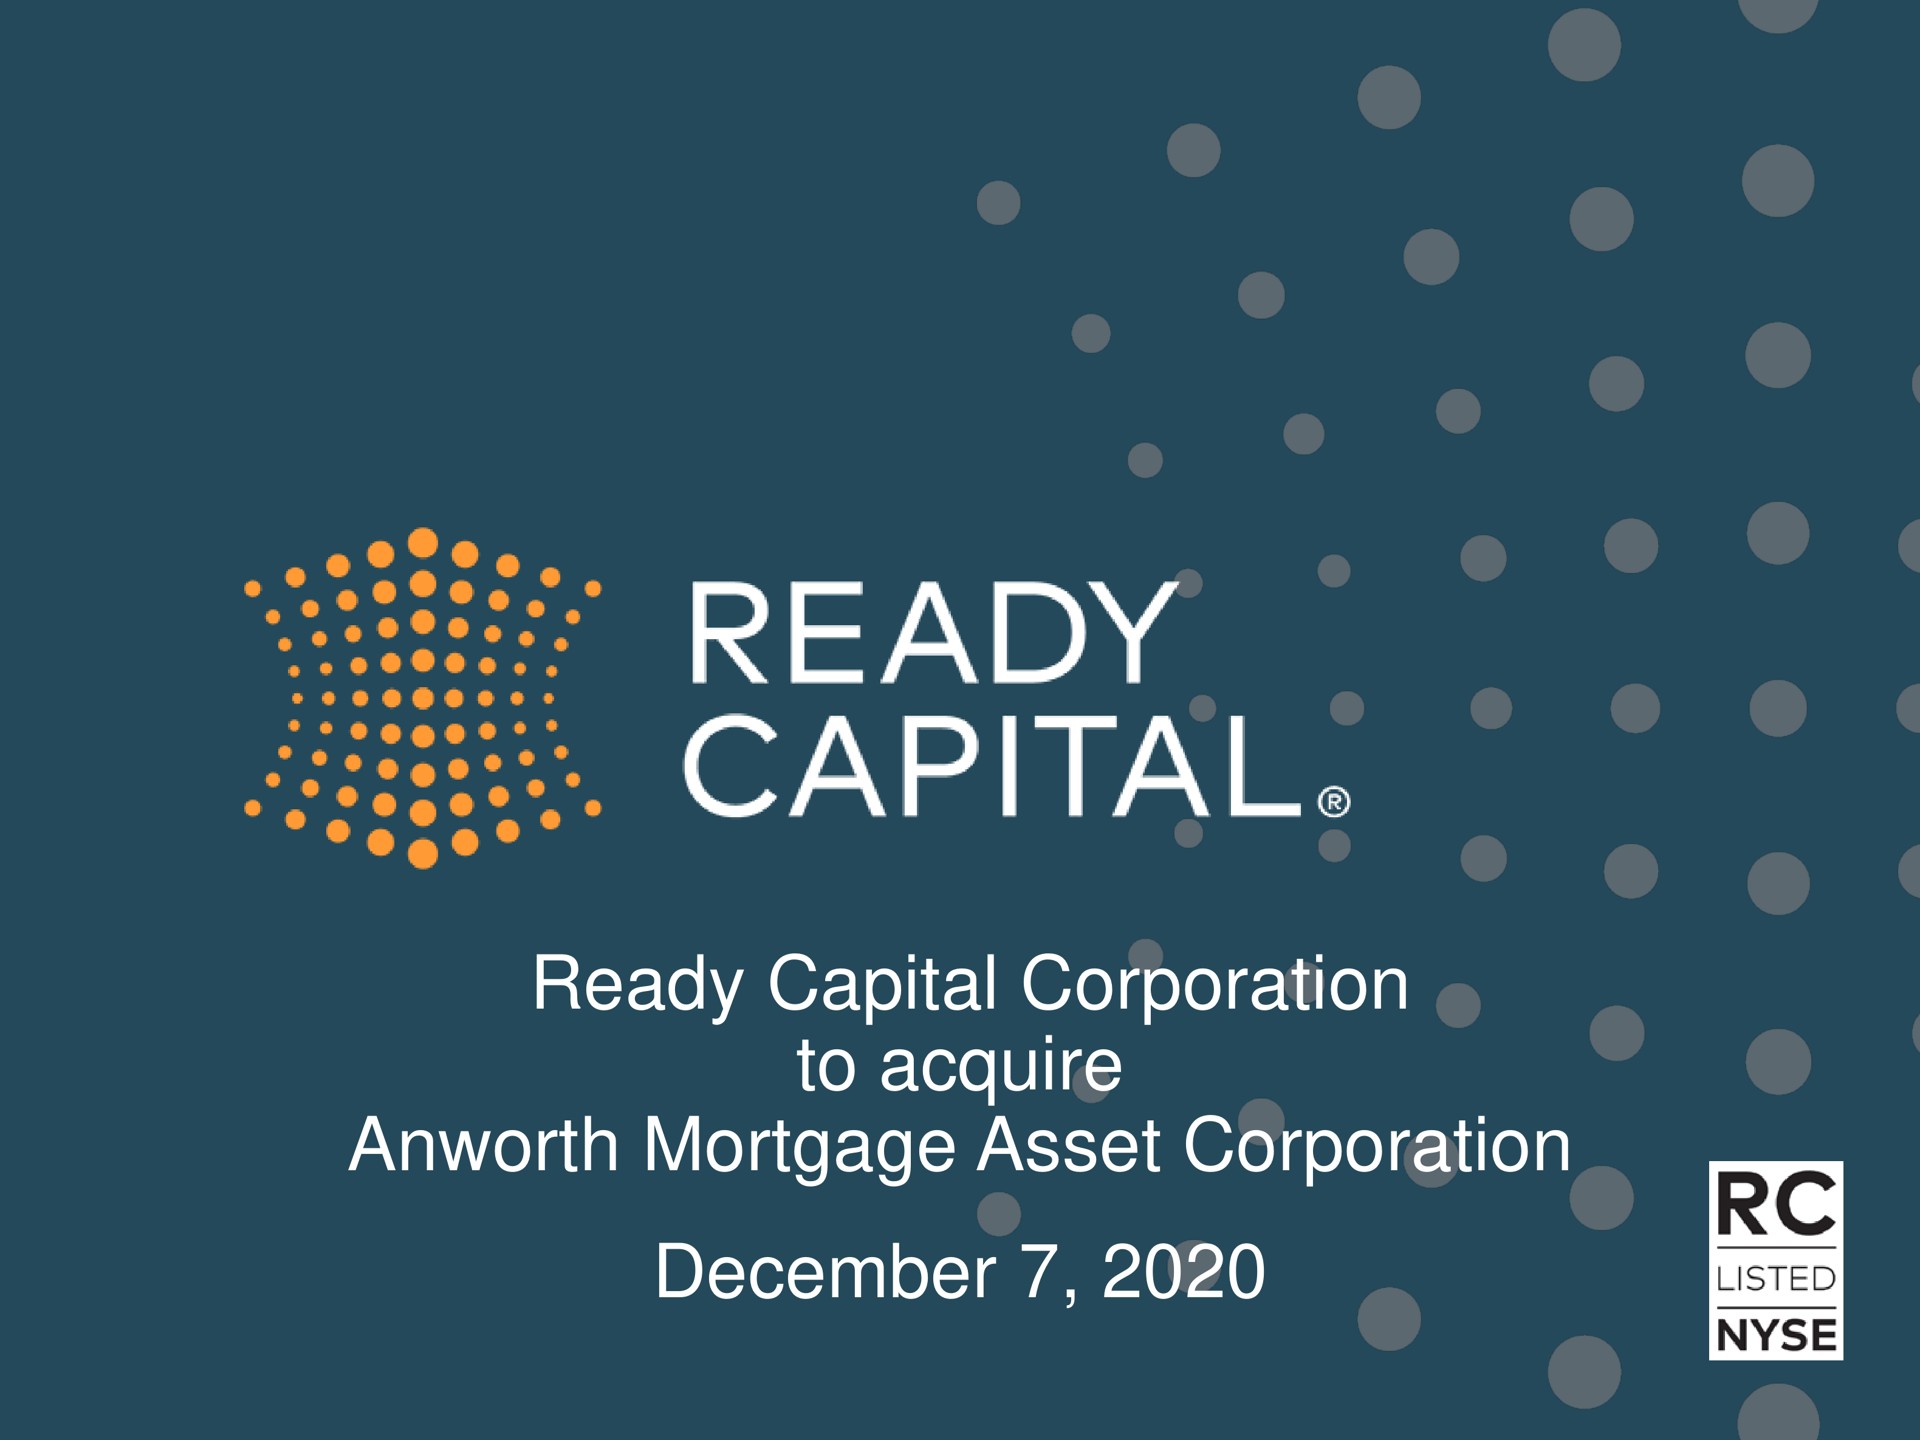 ready capital corporation to acquire mortgage asset corporation baa | Ready Capital